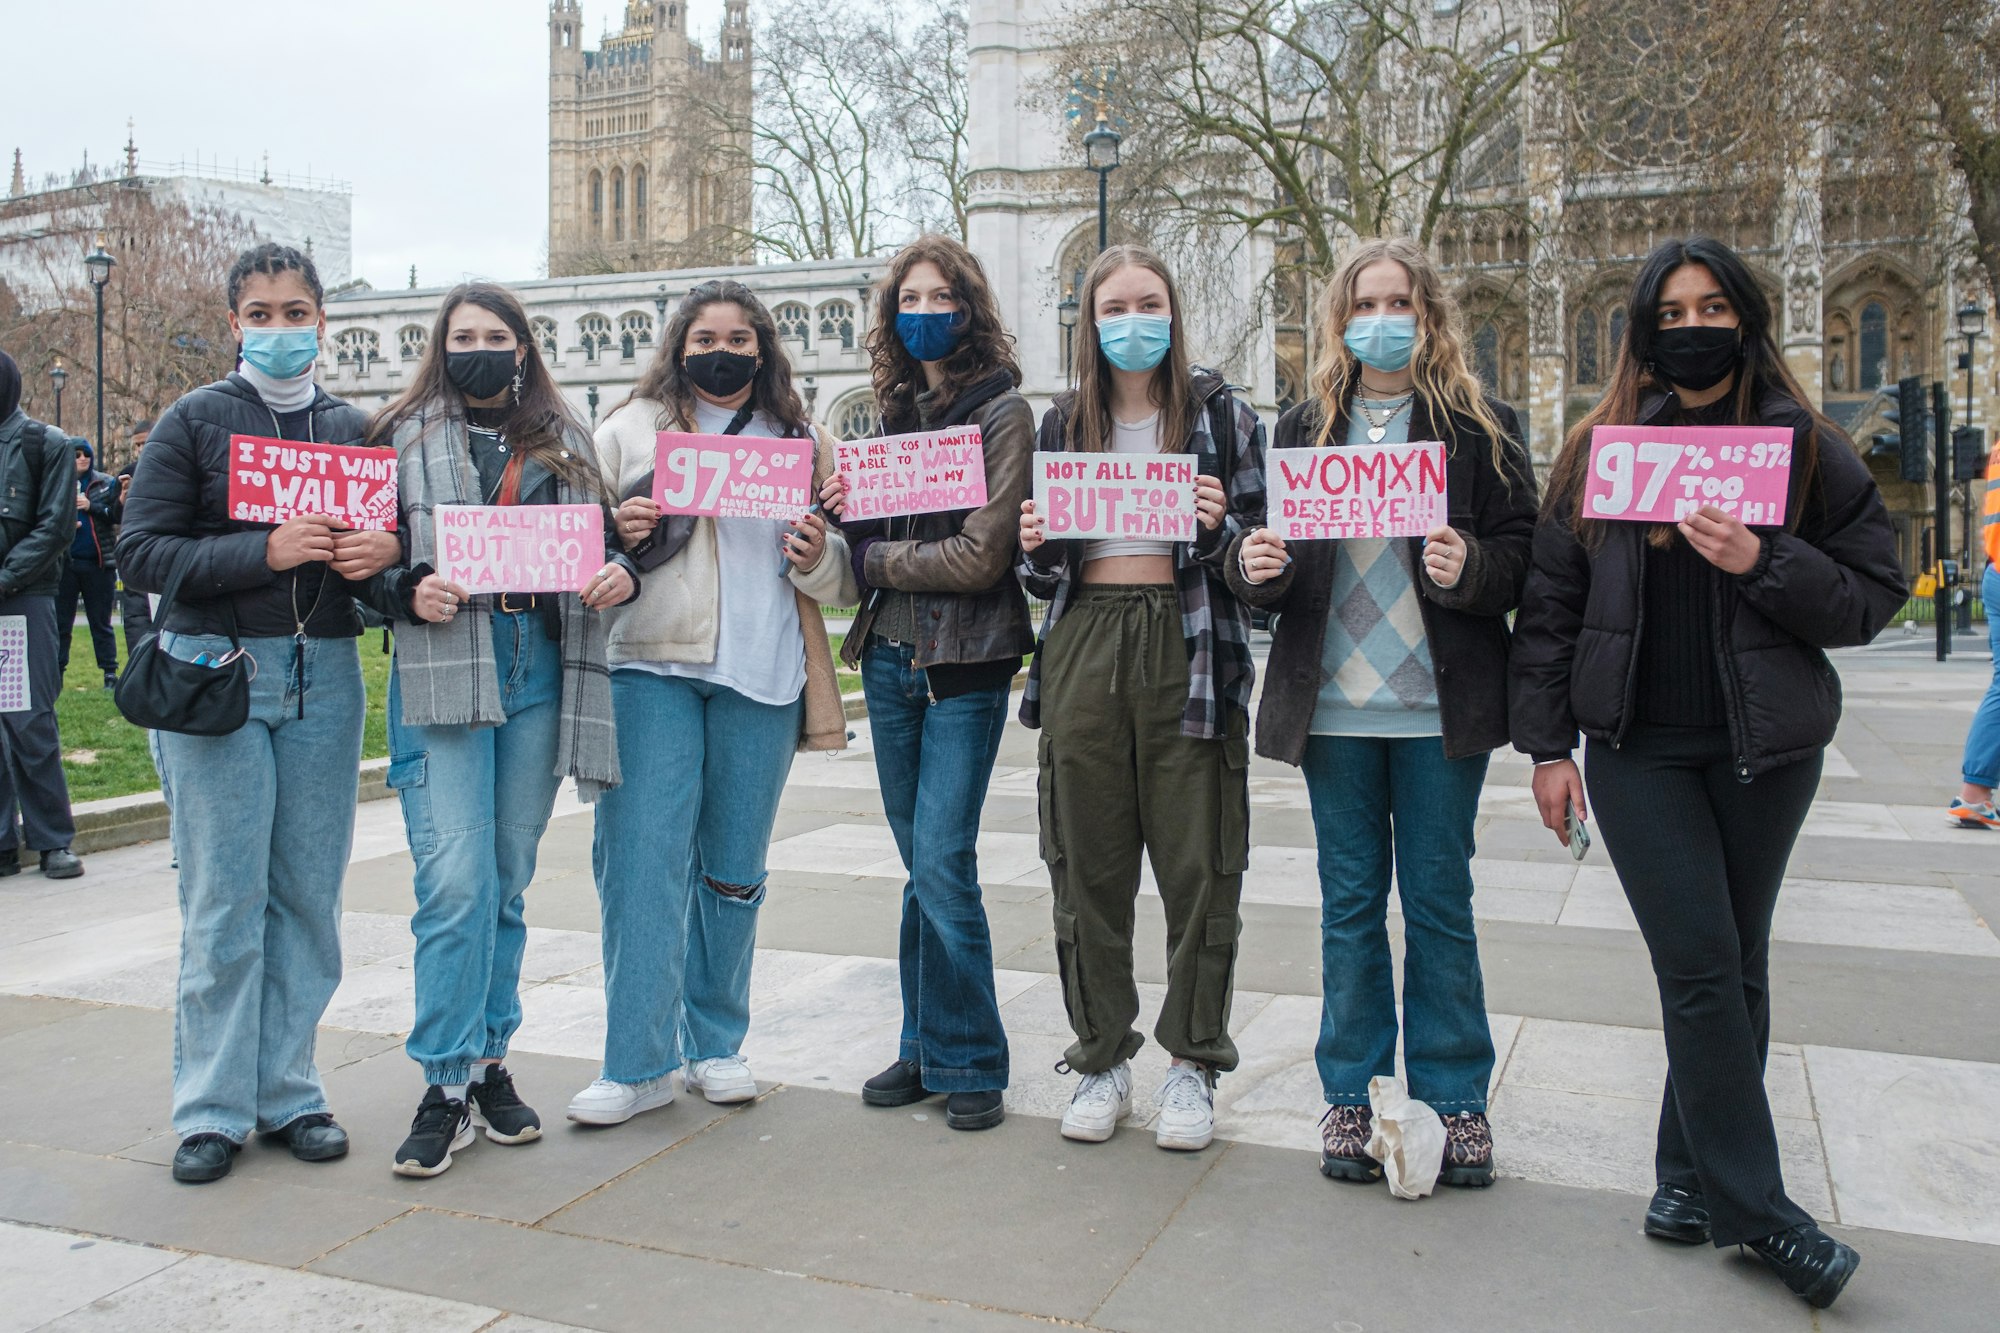 The 97% March, from Trafalgar Square to Parliament, comes after a survey, conducted by UN Women UK, found 97 per cent of women aged 18 to 24 had been sexually harassed, while 80 per cent of women of all ages said they had been harassed in public spaces.